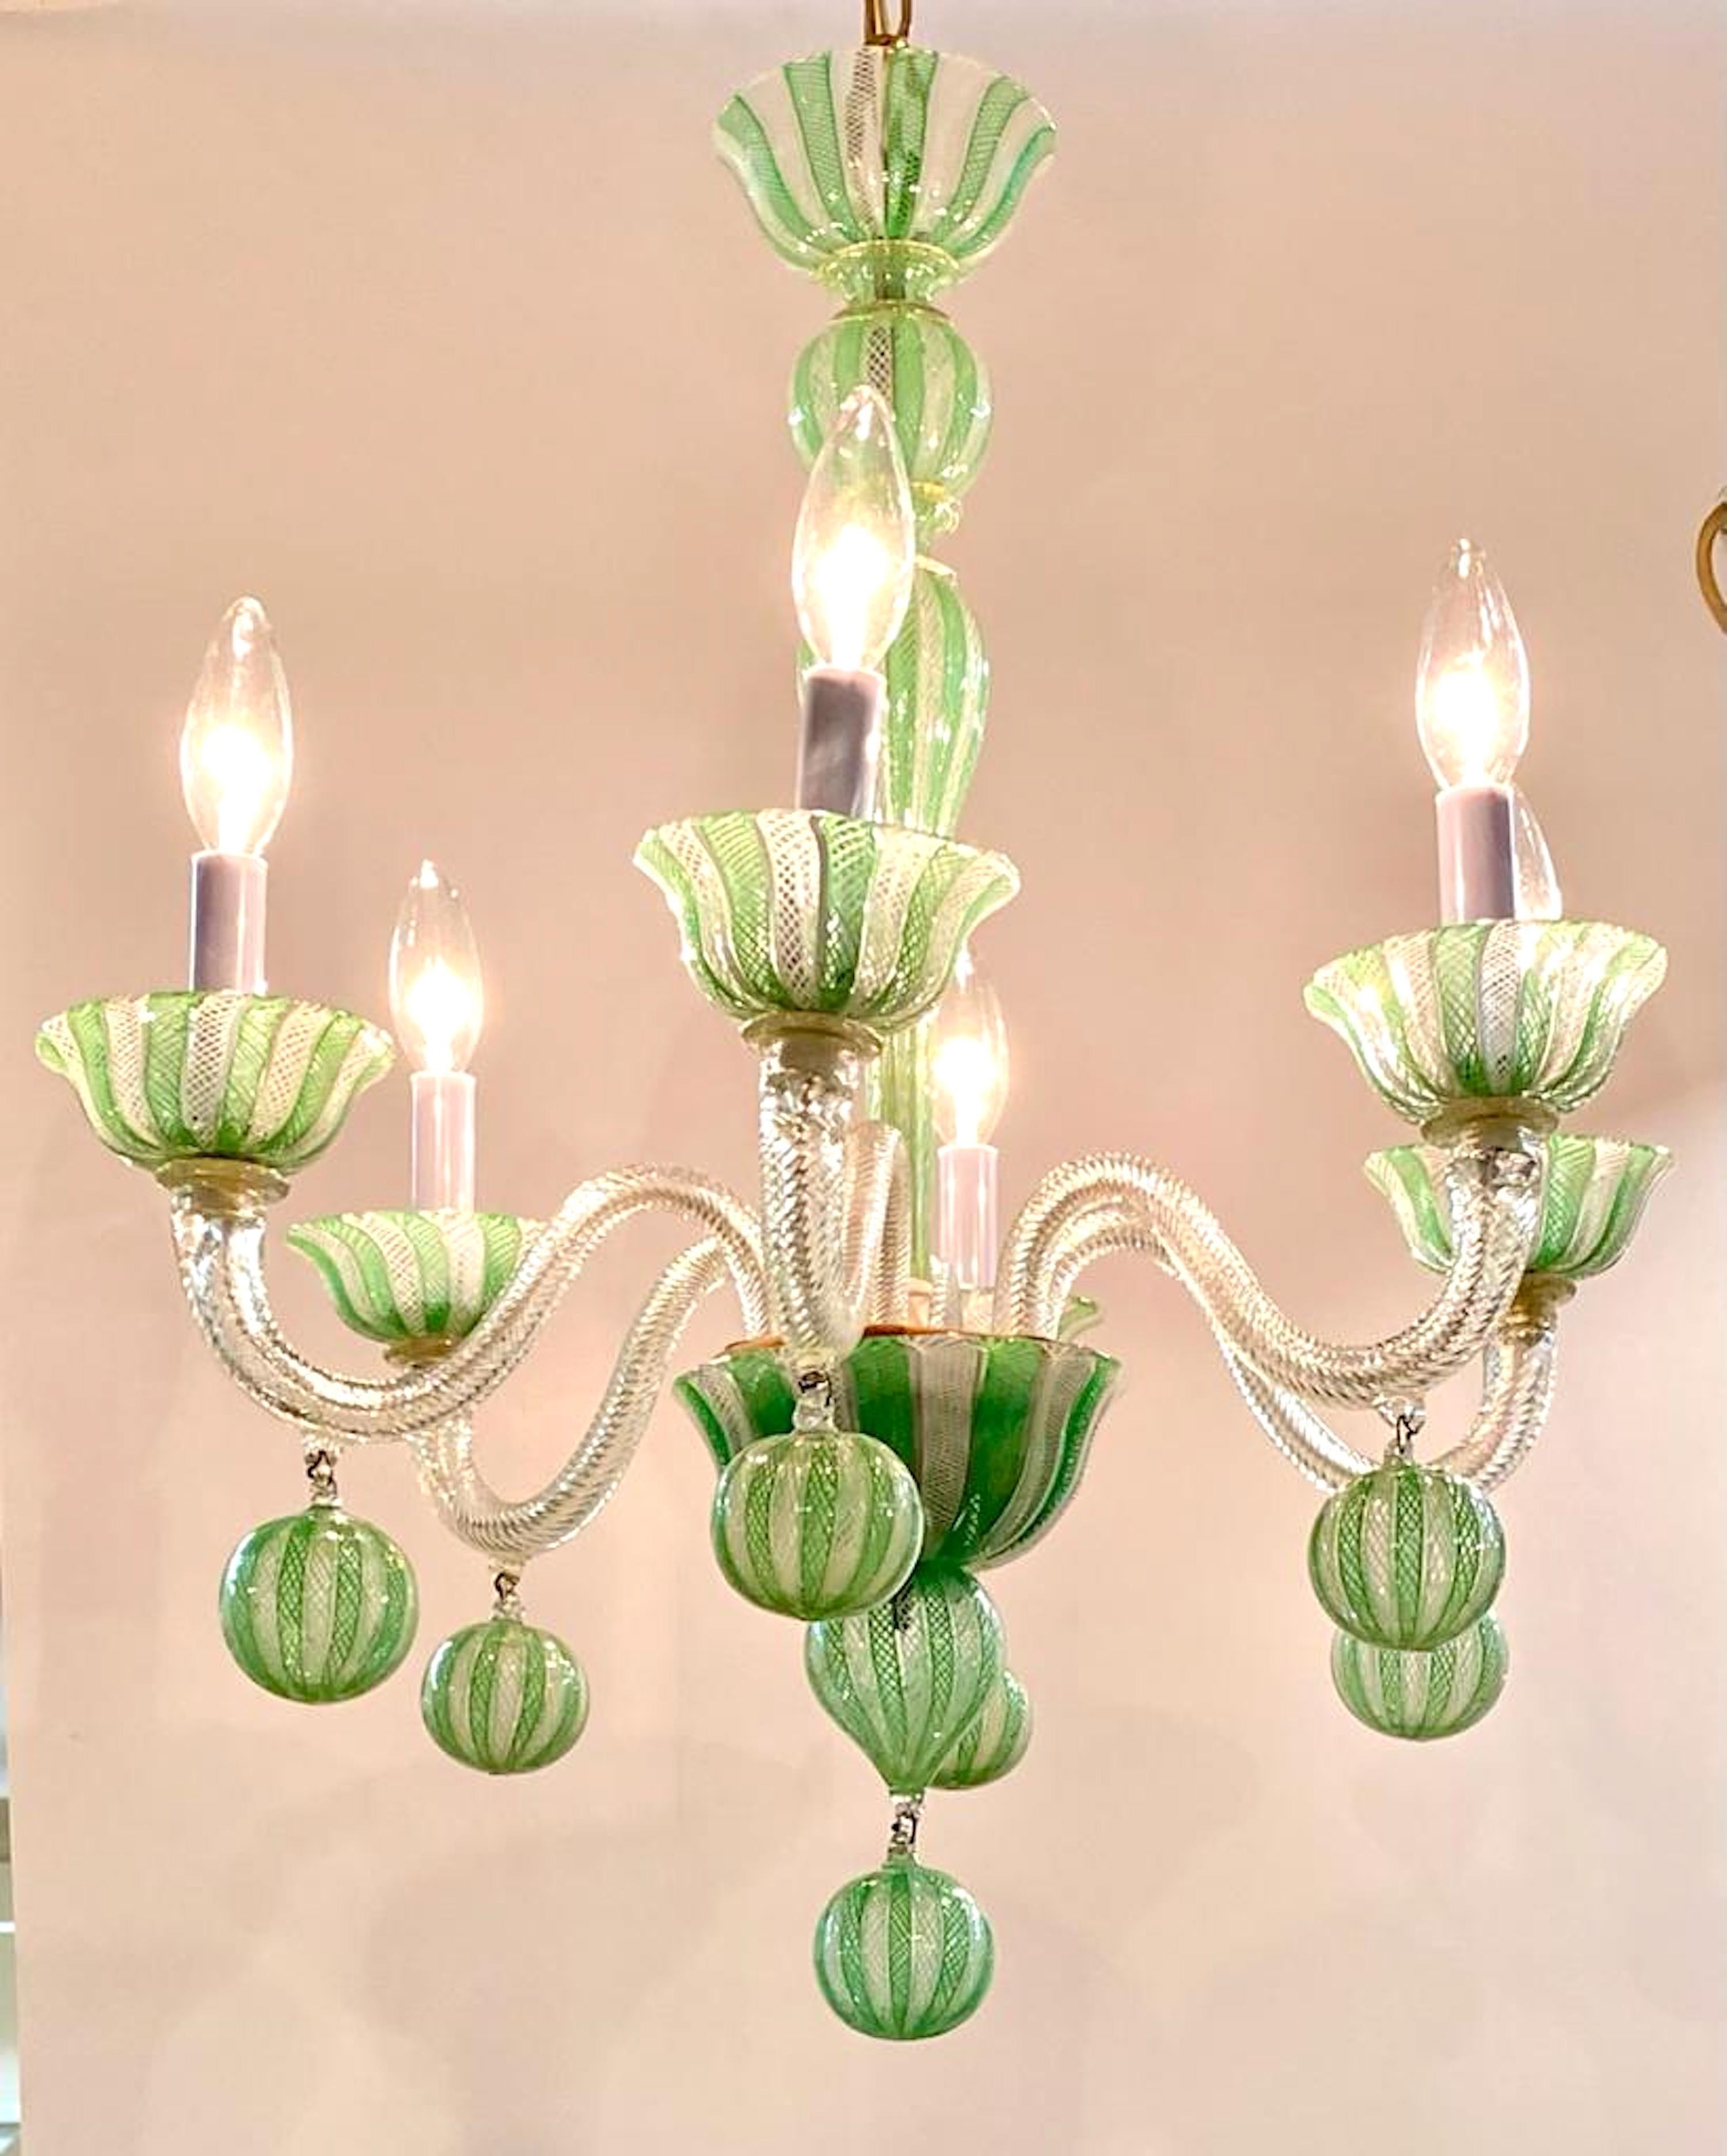 A lovely and unique design 1950s Venetian glass chandelier attributed to the famous glass house Venini. The chandelier is hand blown in clear glass with criss crossing lines in white and green glass. The criss cross design, known as reticello, is